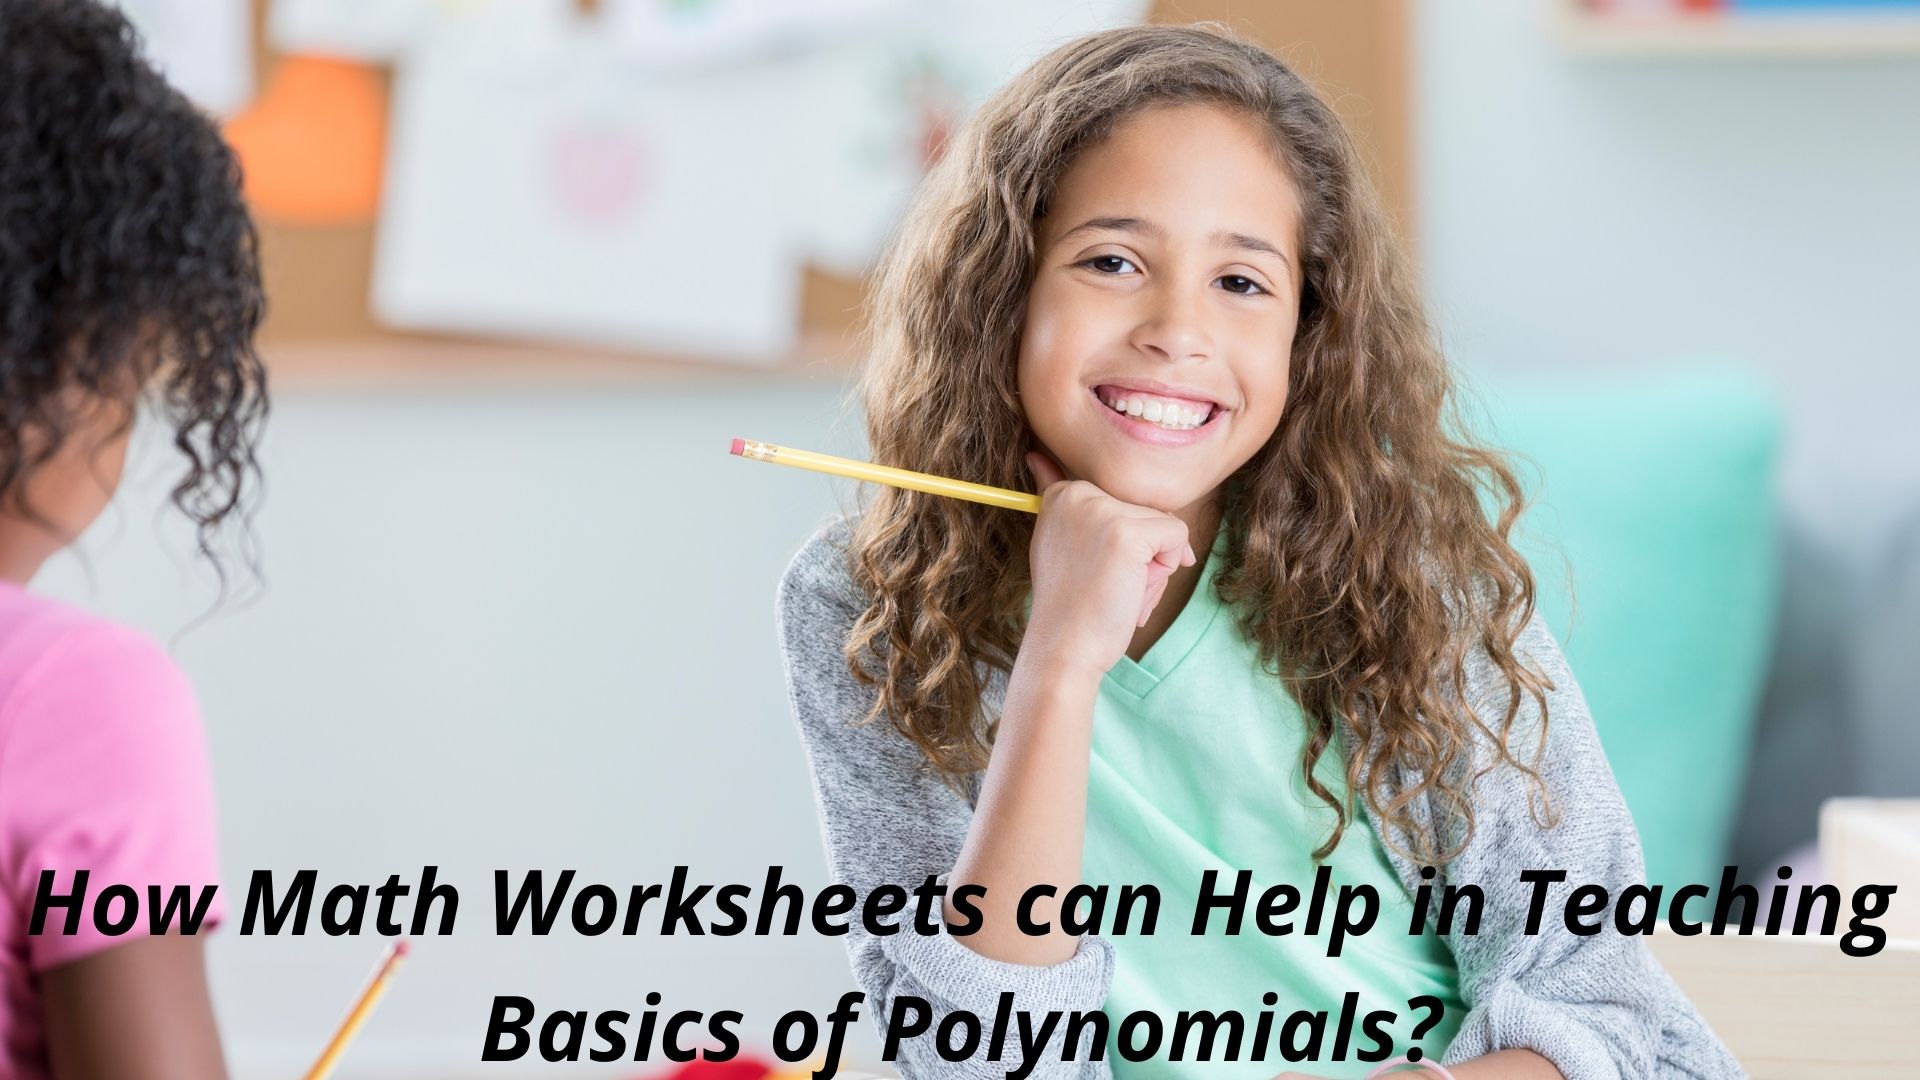 How Math Worksheets can Help in Teaching Basics of Polynomials?